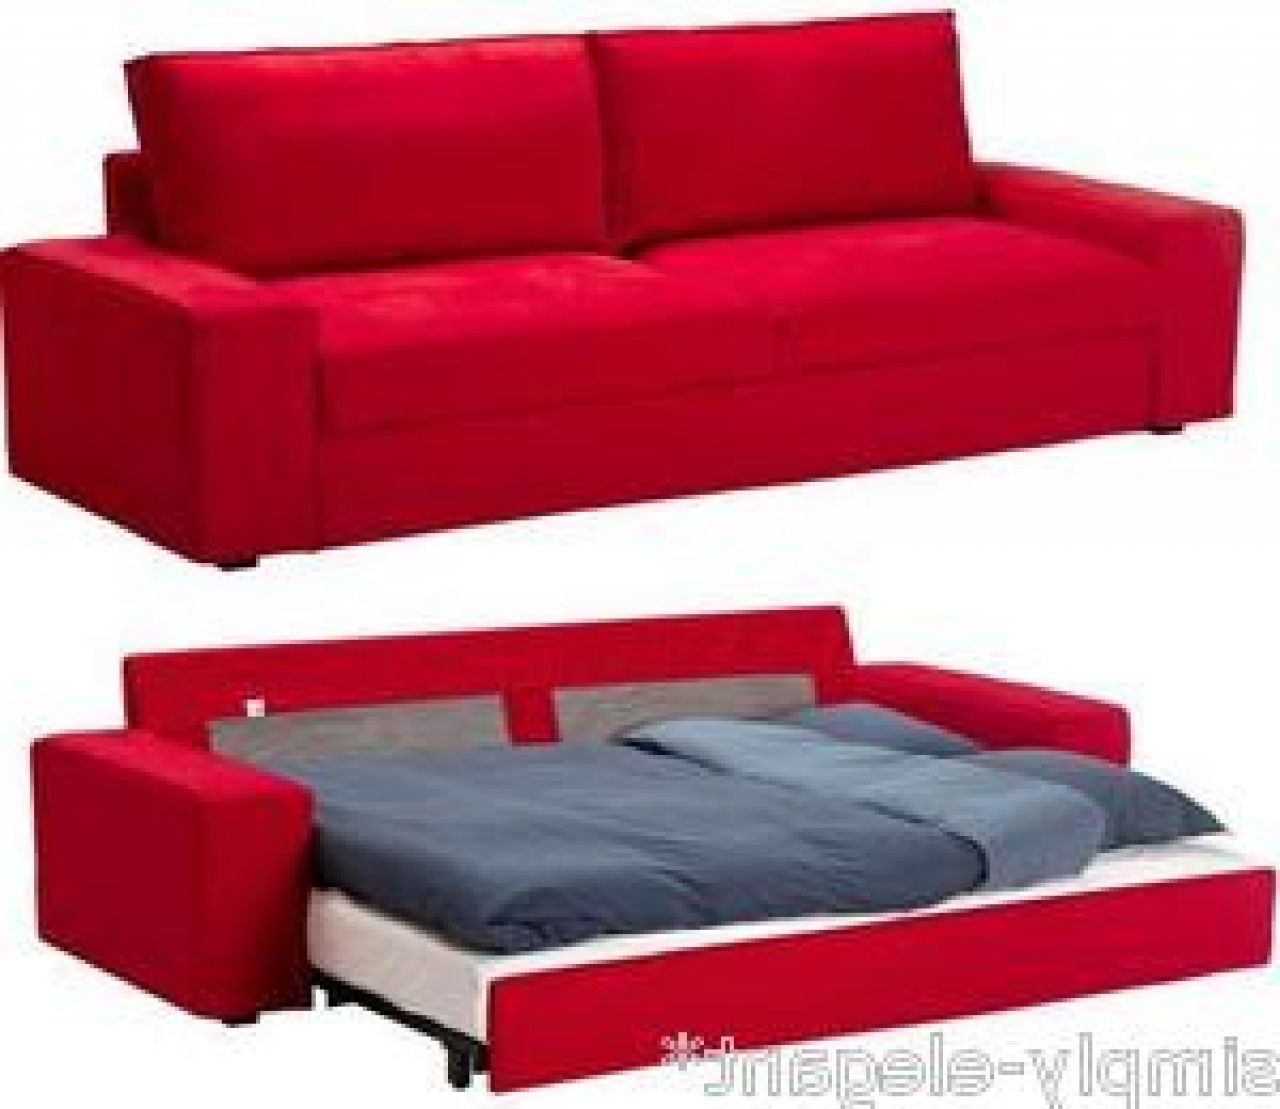 2018 Red Sleeper Sofa Expansive Table Chair Sets Beds, Frames Bases With Red Sleeper Sofas (Photo 3 of 15)